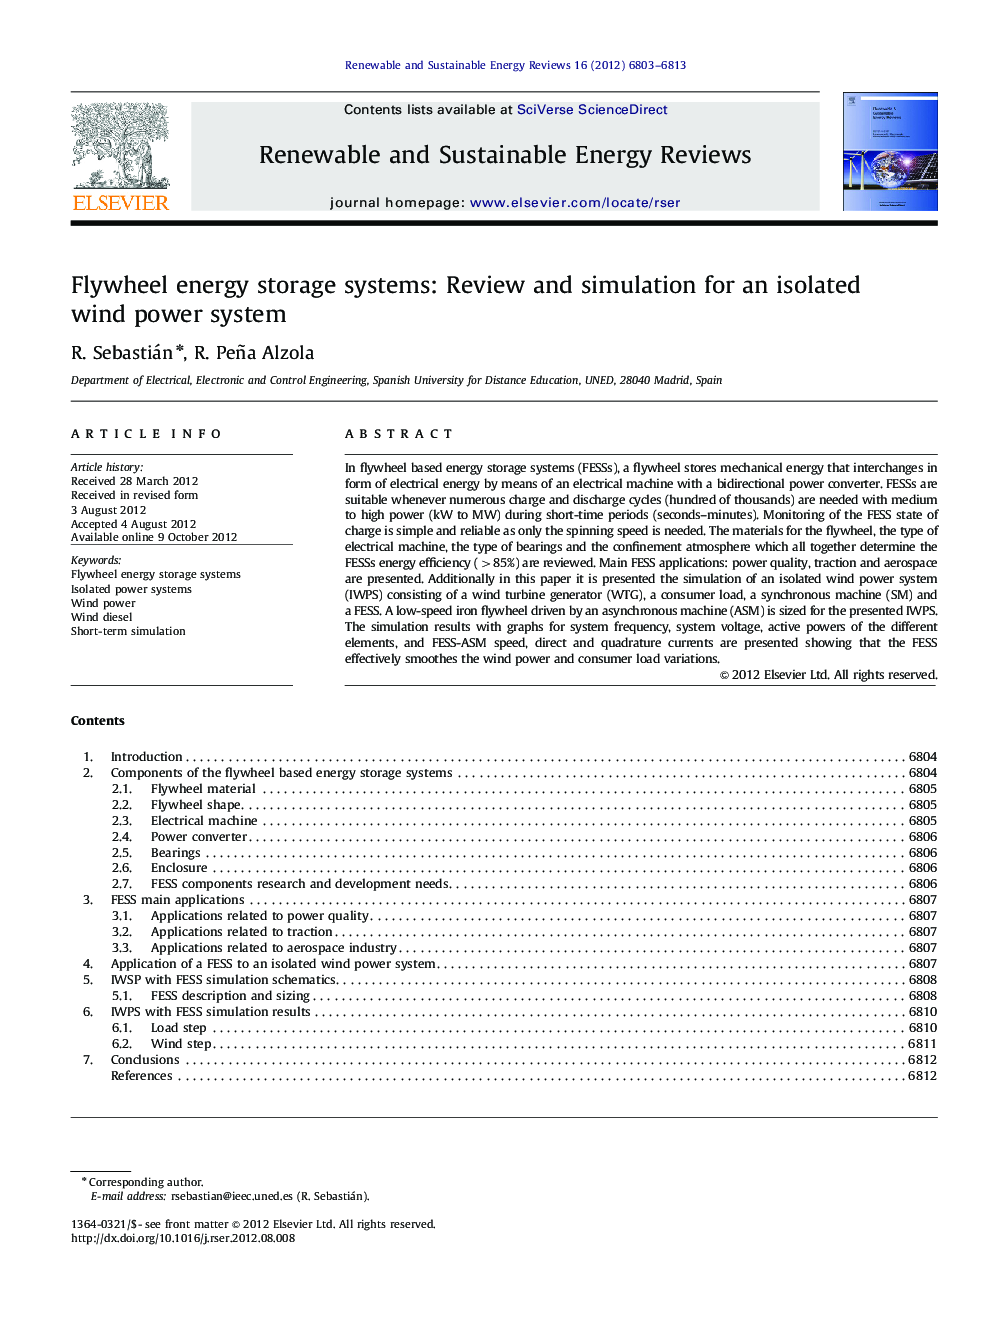 Flywheel energy storage systems: Review and simulation for an isolated wind power system